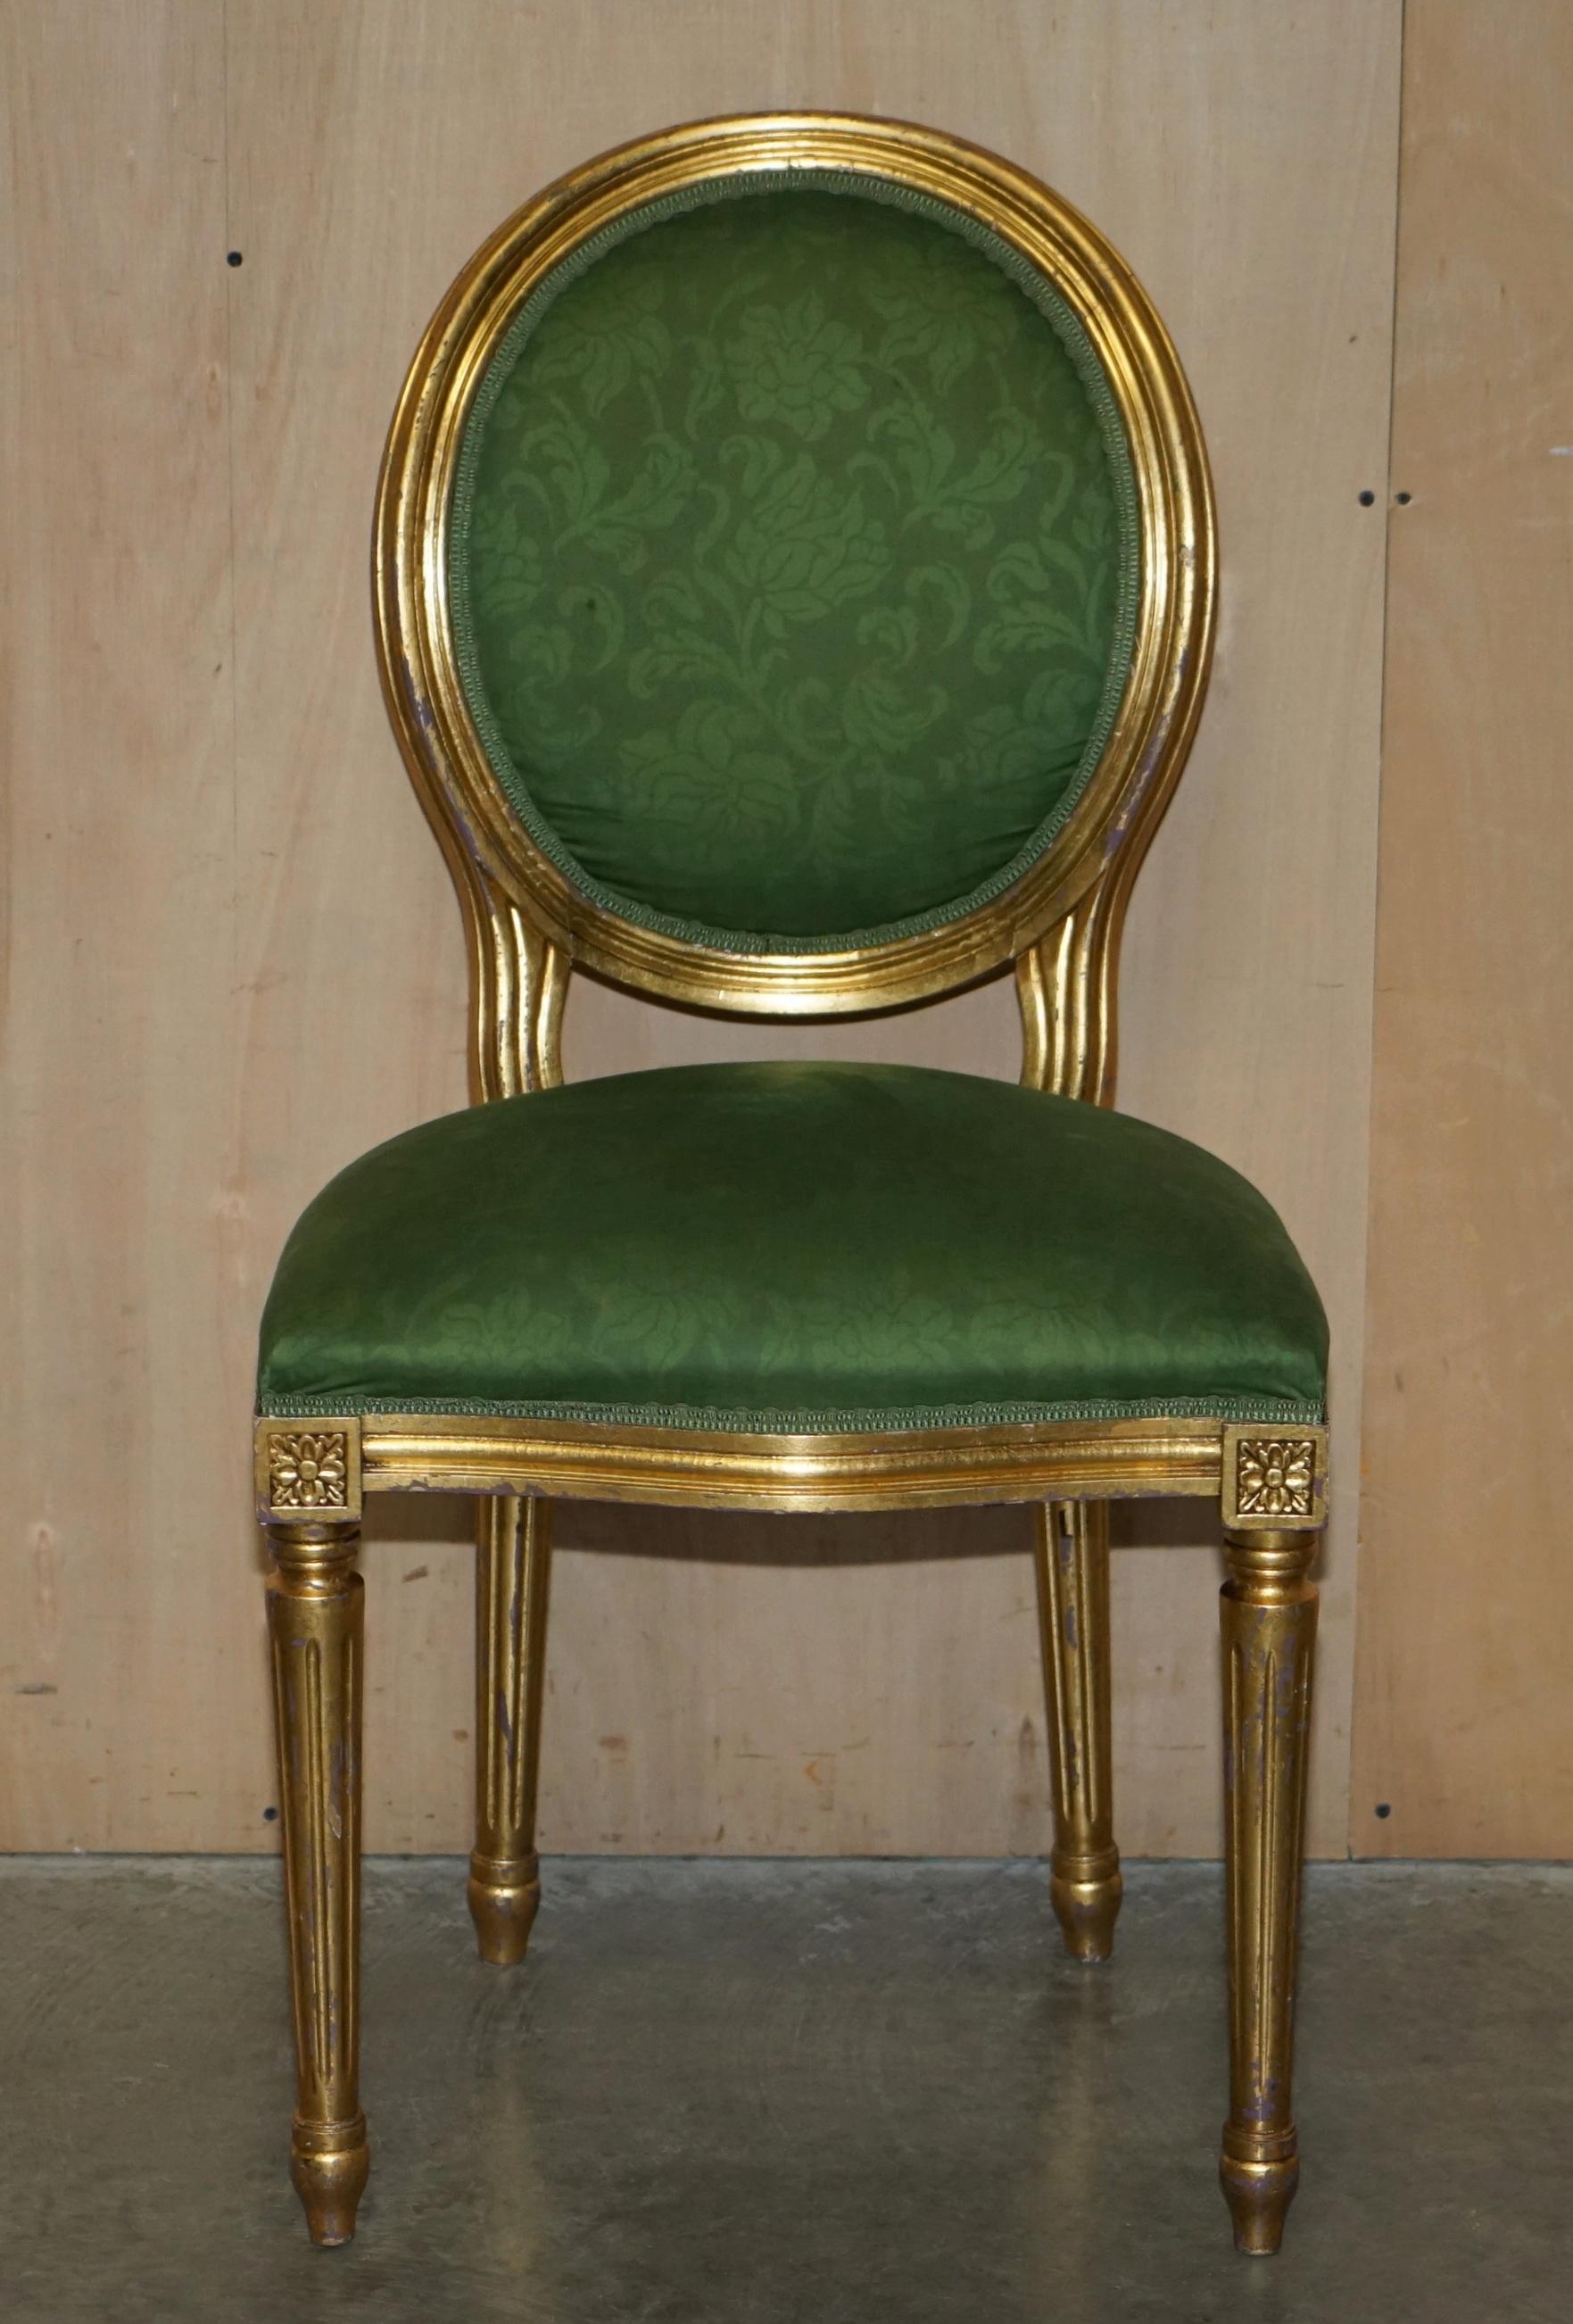 EiGHT ANTIQUE LOUIS XVI  Style DINING CHAIRS FROM LADY DIANA'S SPENCER HOUSE 8 (Englisch) im Angebot